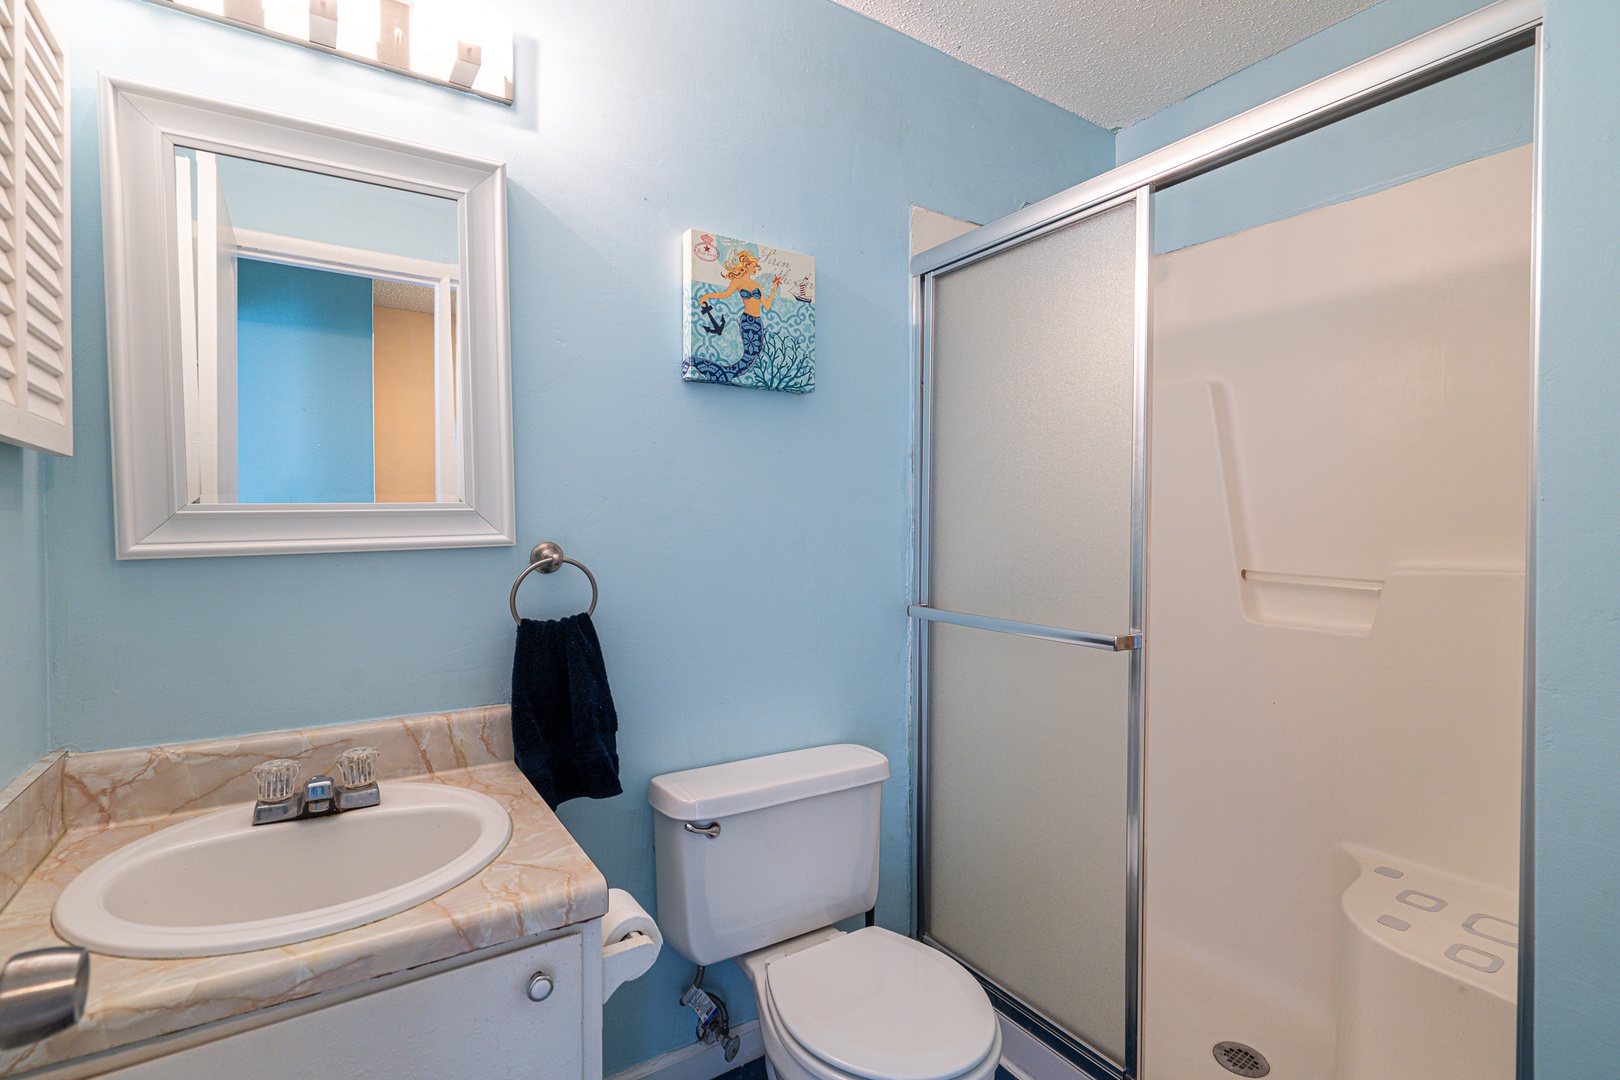 This full bath on the second floor offers a single vanity & glass shower